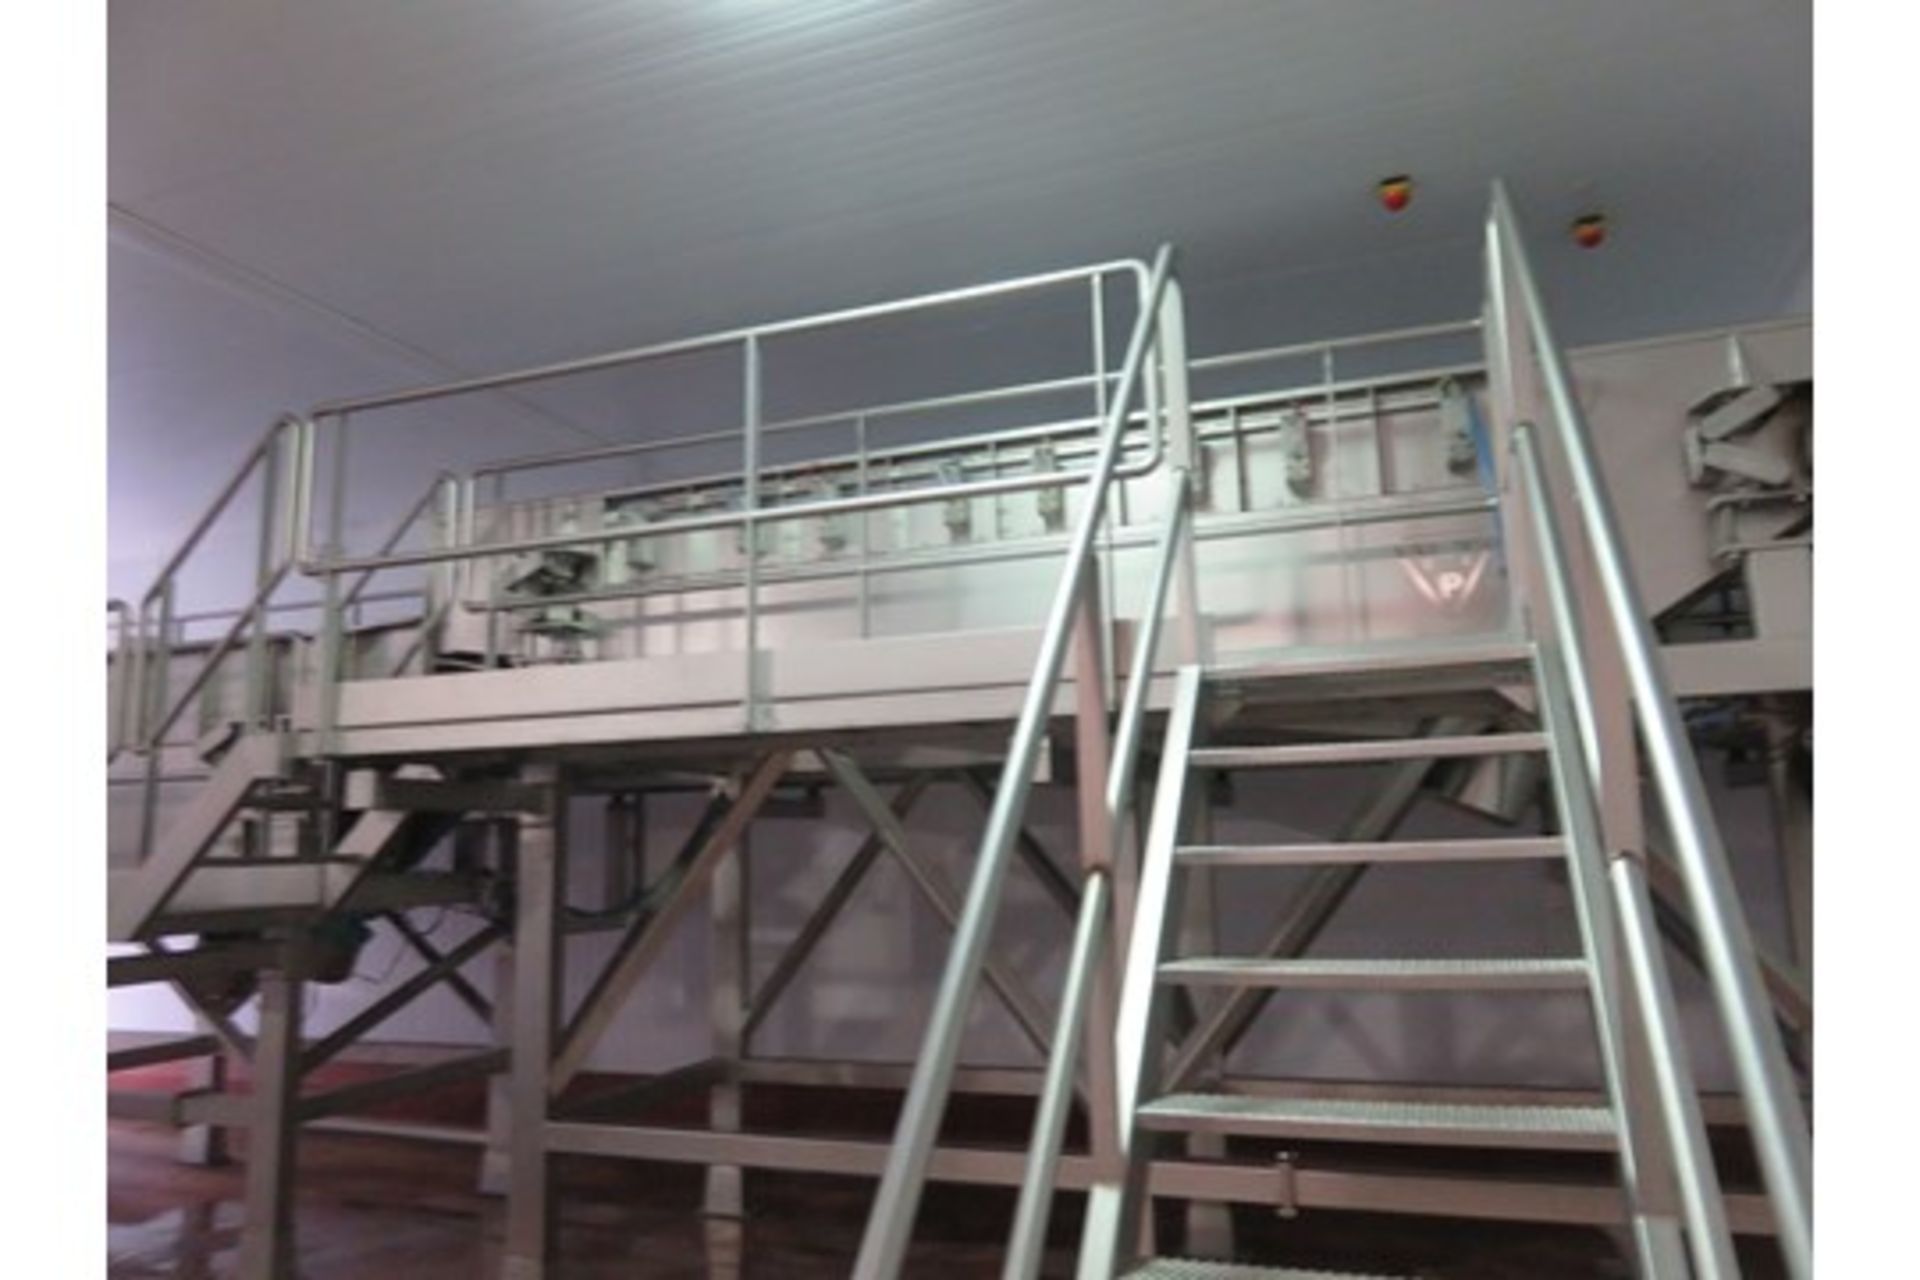 De-husking System by VTP(Vibtech Processing) (1) 5.5 meter long x 1meter wide overall 3.3meters wide